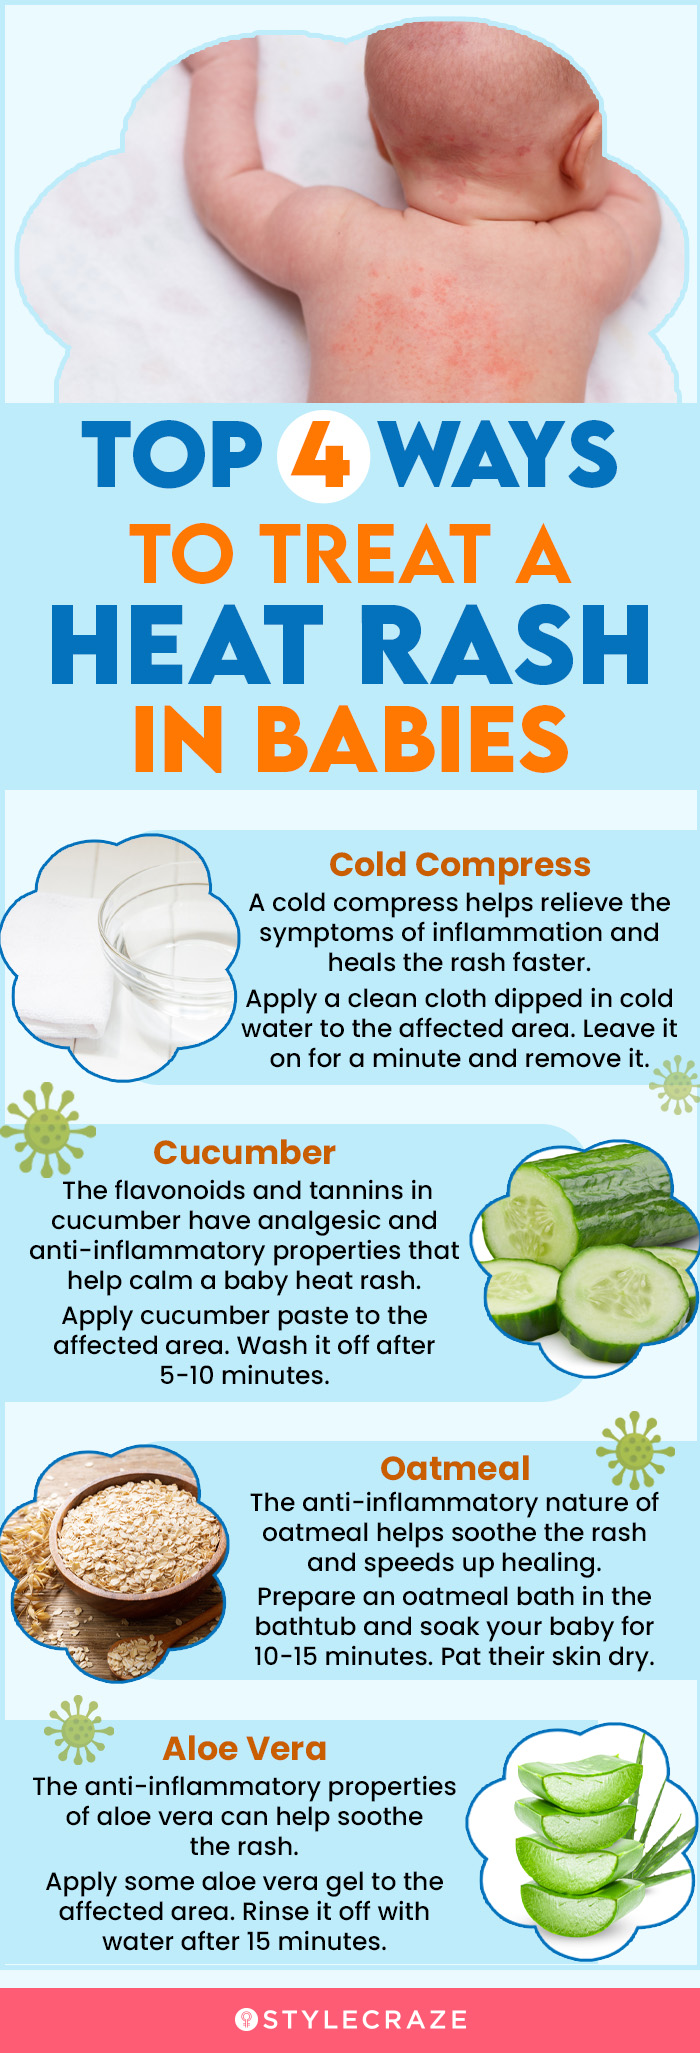 how to reduce body heat in babies home remedies